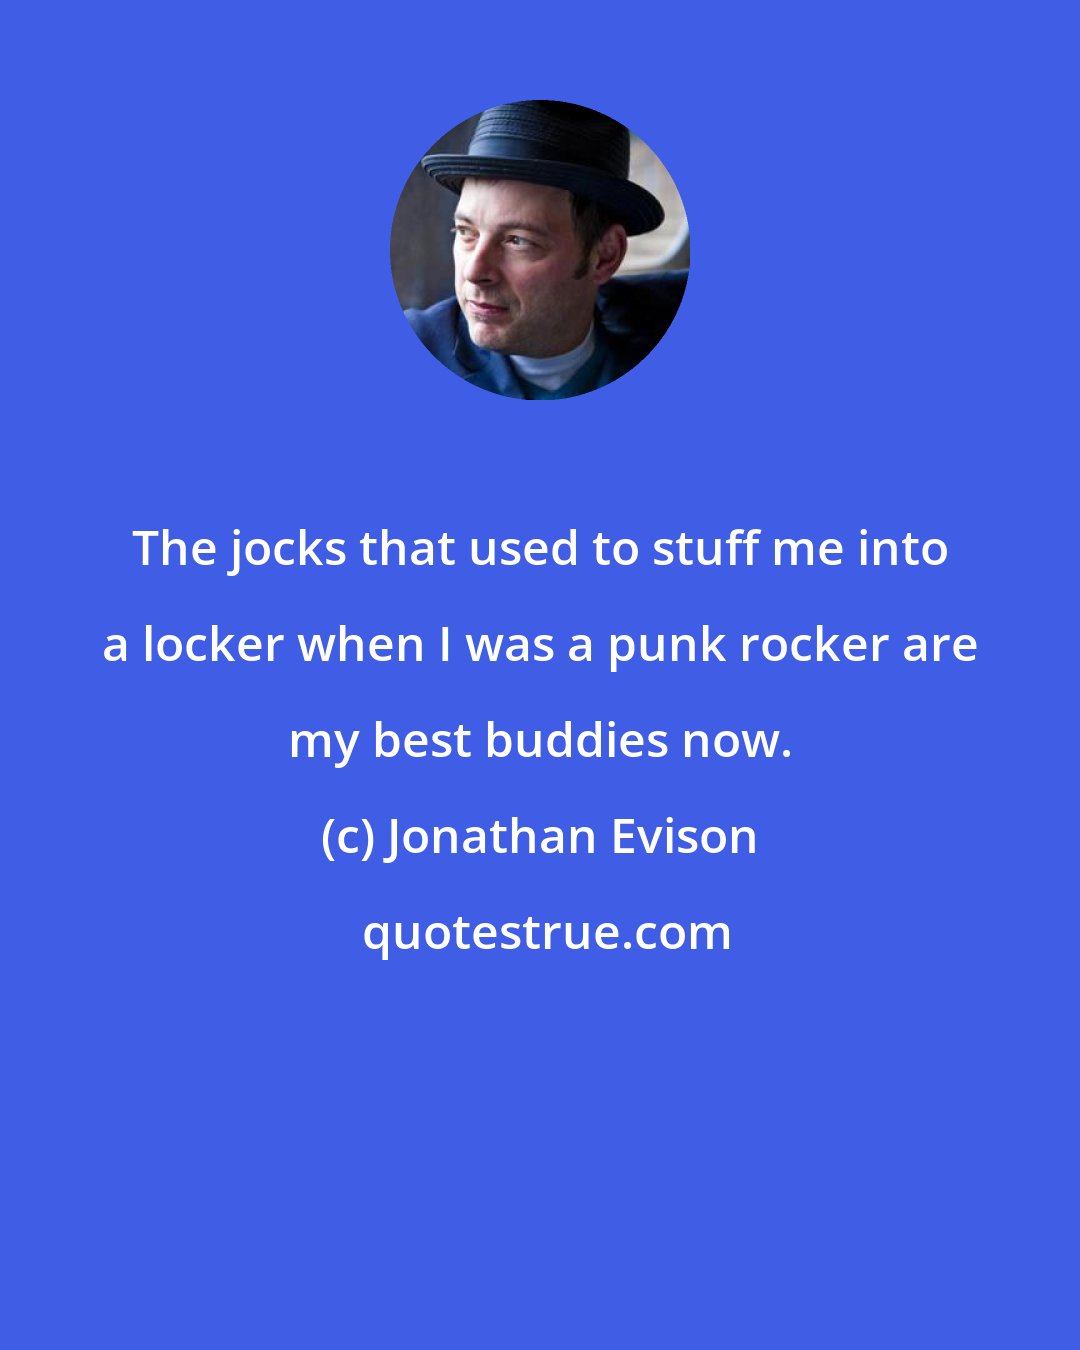 Jonathan Evison: The jocks that used to stuff me into a locker when I was a punk rocker are my best buddies now.